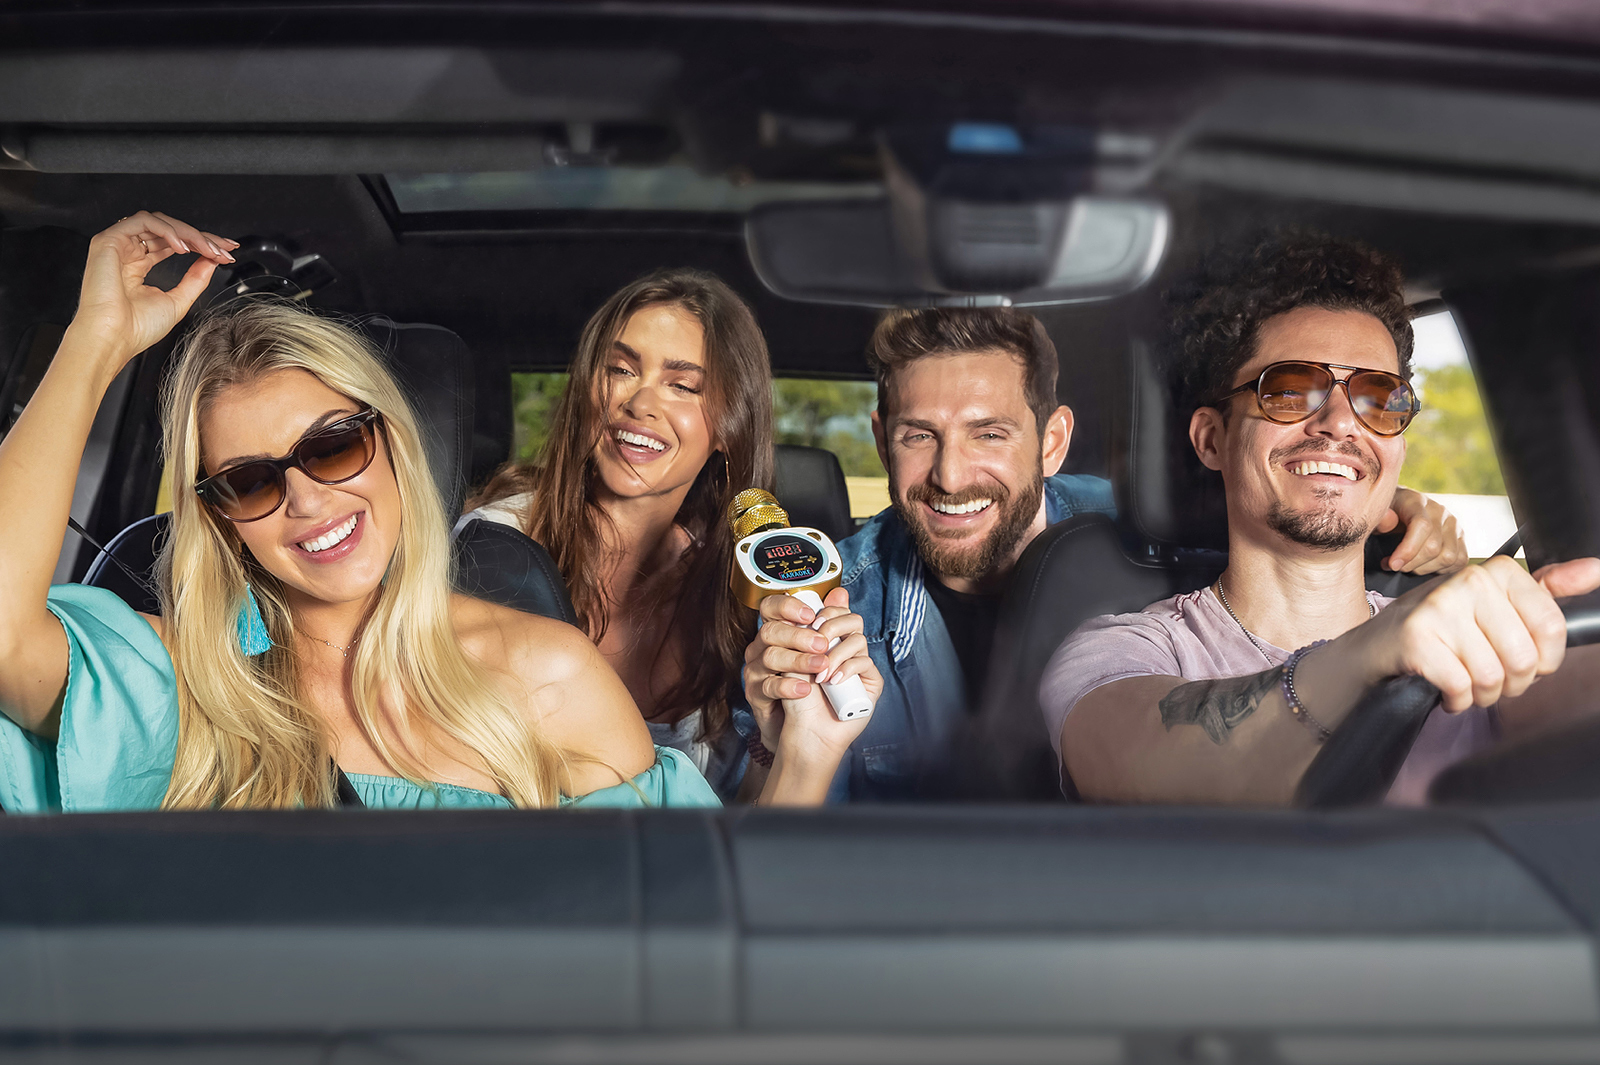 Front view of two men and two women seated in car. All are  smiling, dancing and singing using the Carpool Karaoke product.